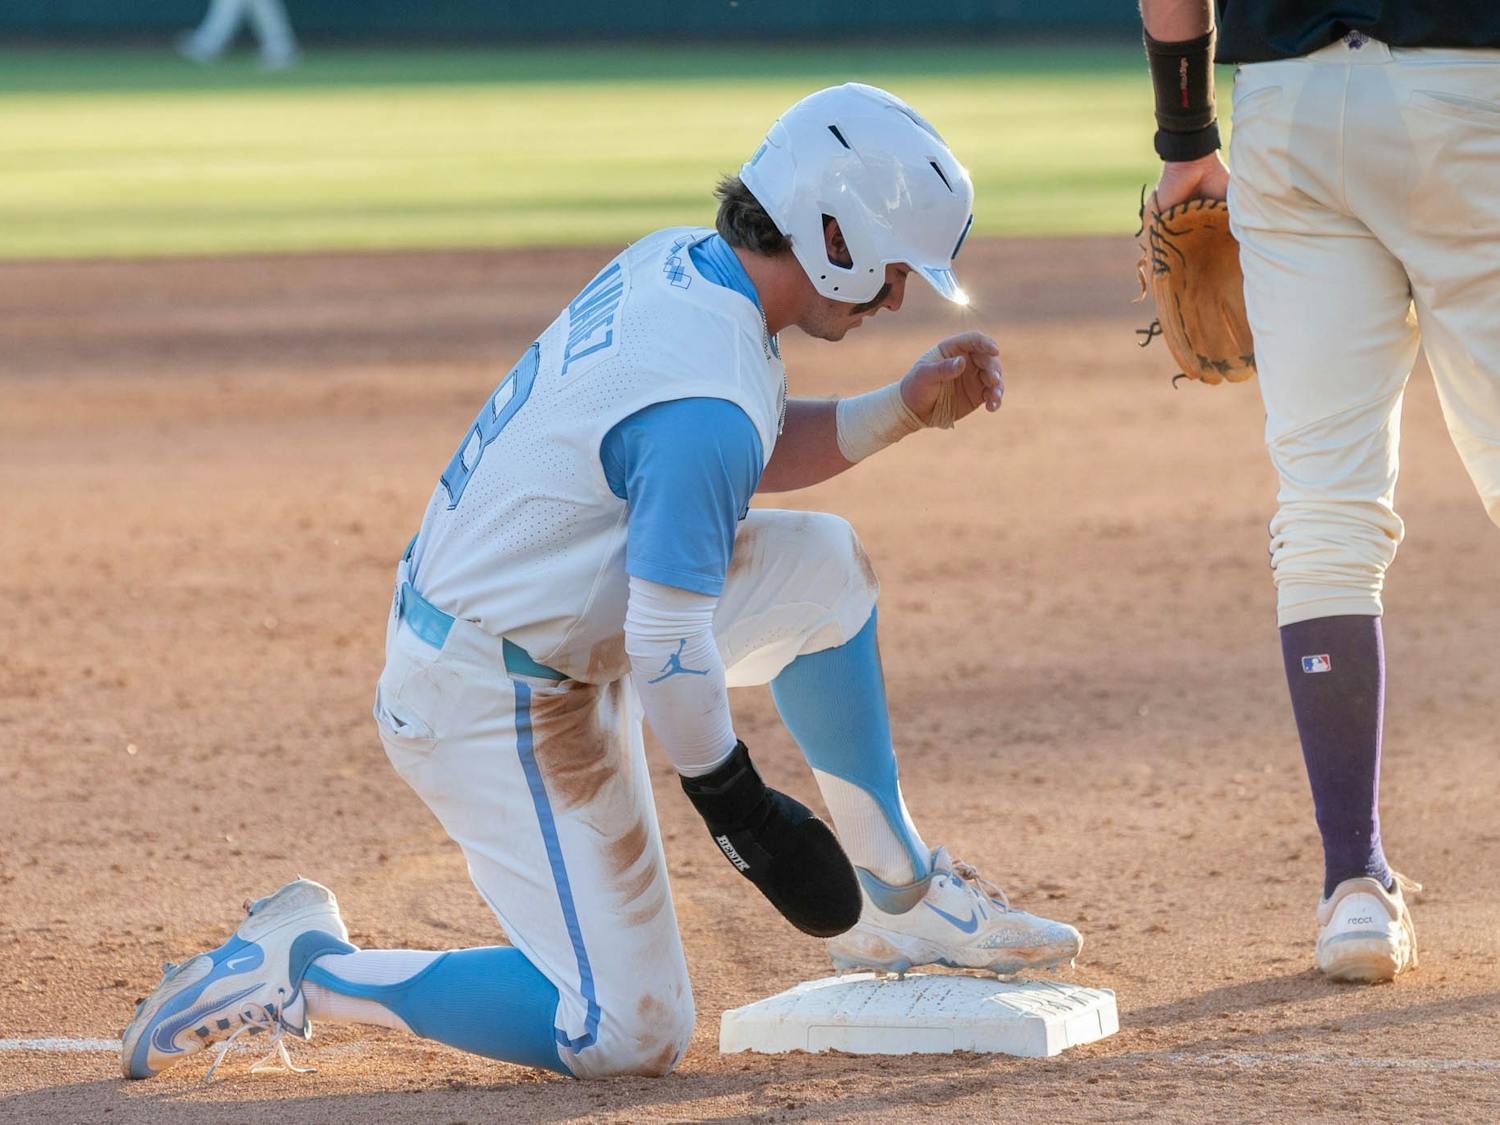 UNC Junior Infielder and Outfielder Patrick Alvarez (8) catches his breath after successfully sliding into third base in the March 7, 2023 game against Western Carolina University in Boshamer Stadium.